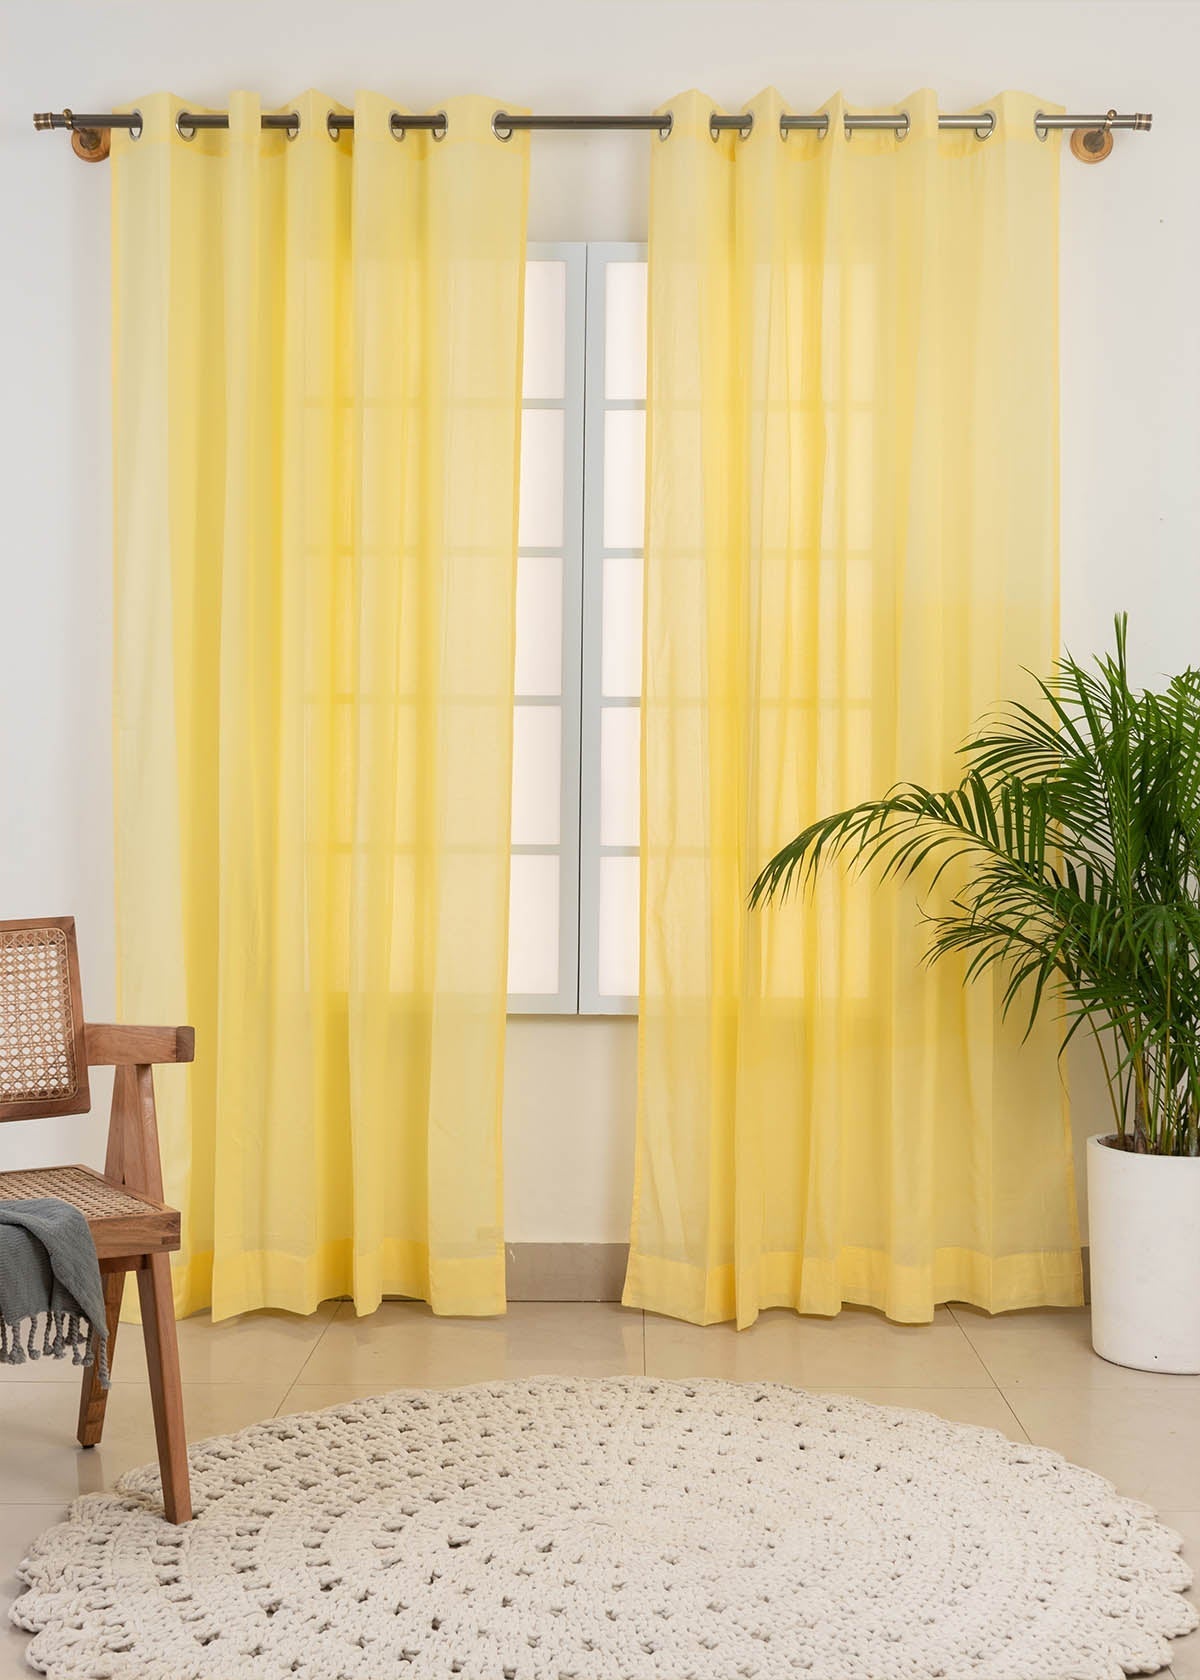 Solid Pale Yellow sheer 100% cotton plain curtain for Living room & bedroom - Light filtering - Pack of 1